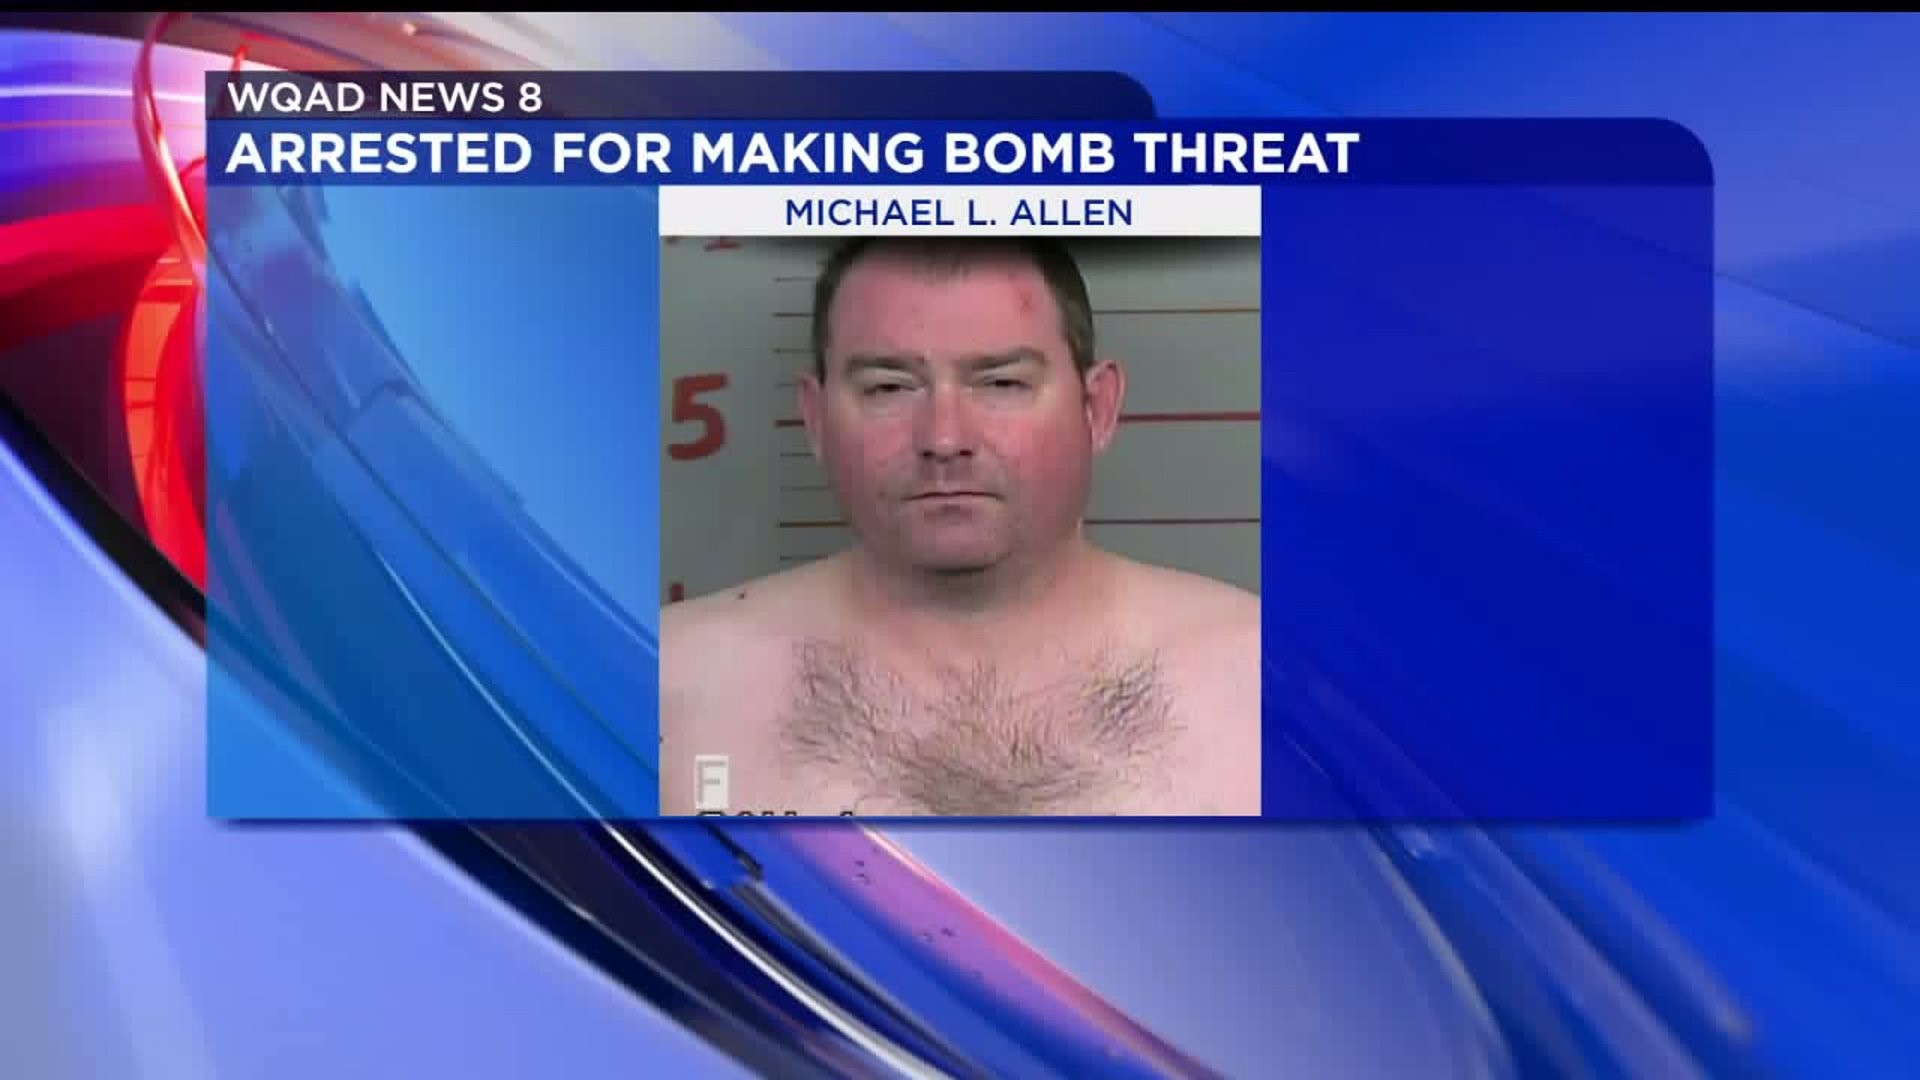 Man arrested after police say he made threat of bomb inside vehicle in Geneseo